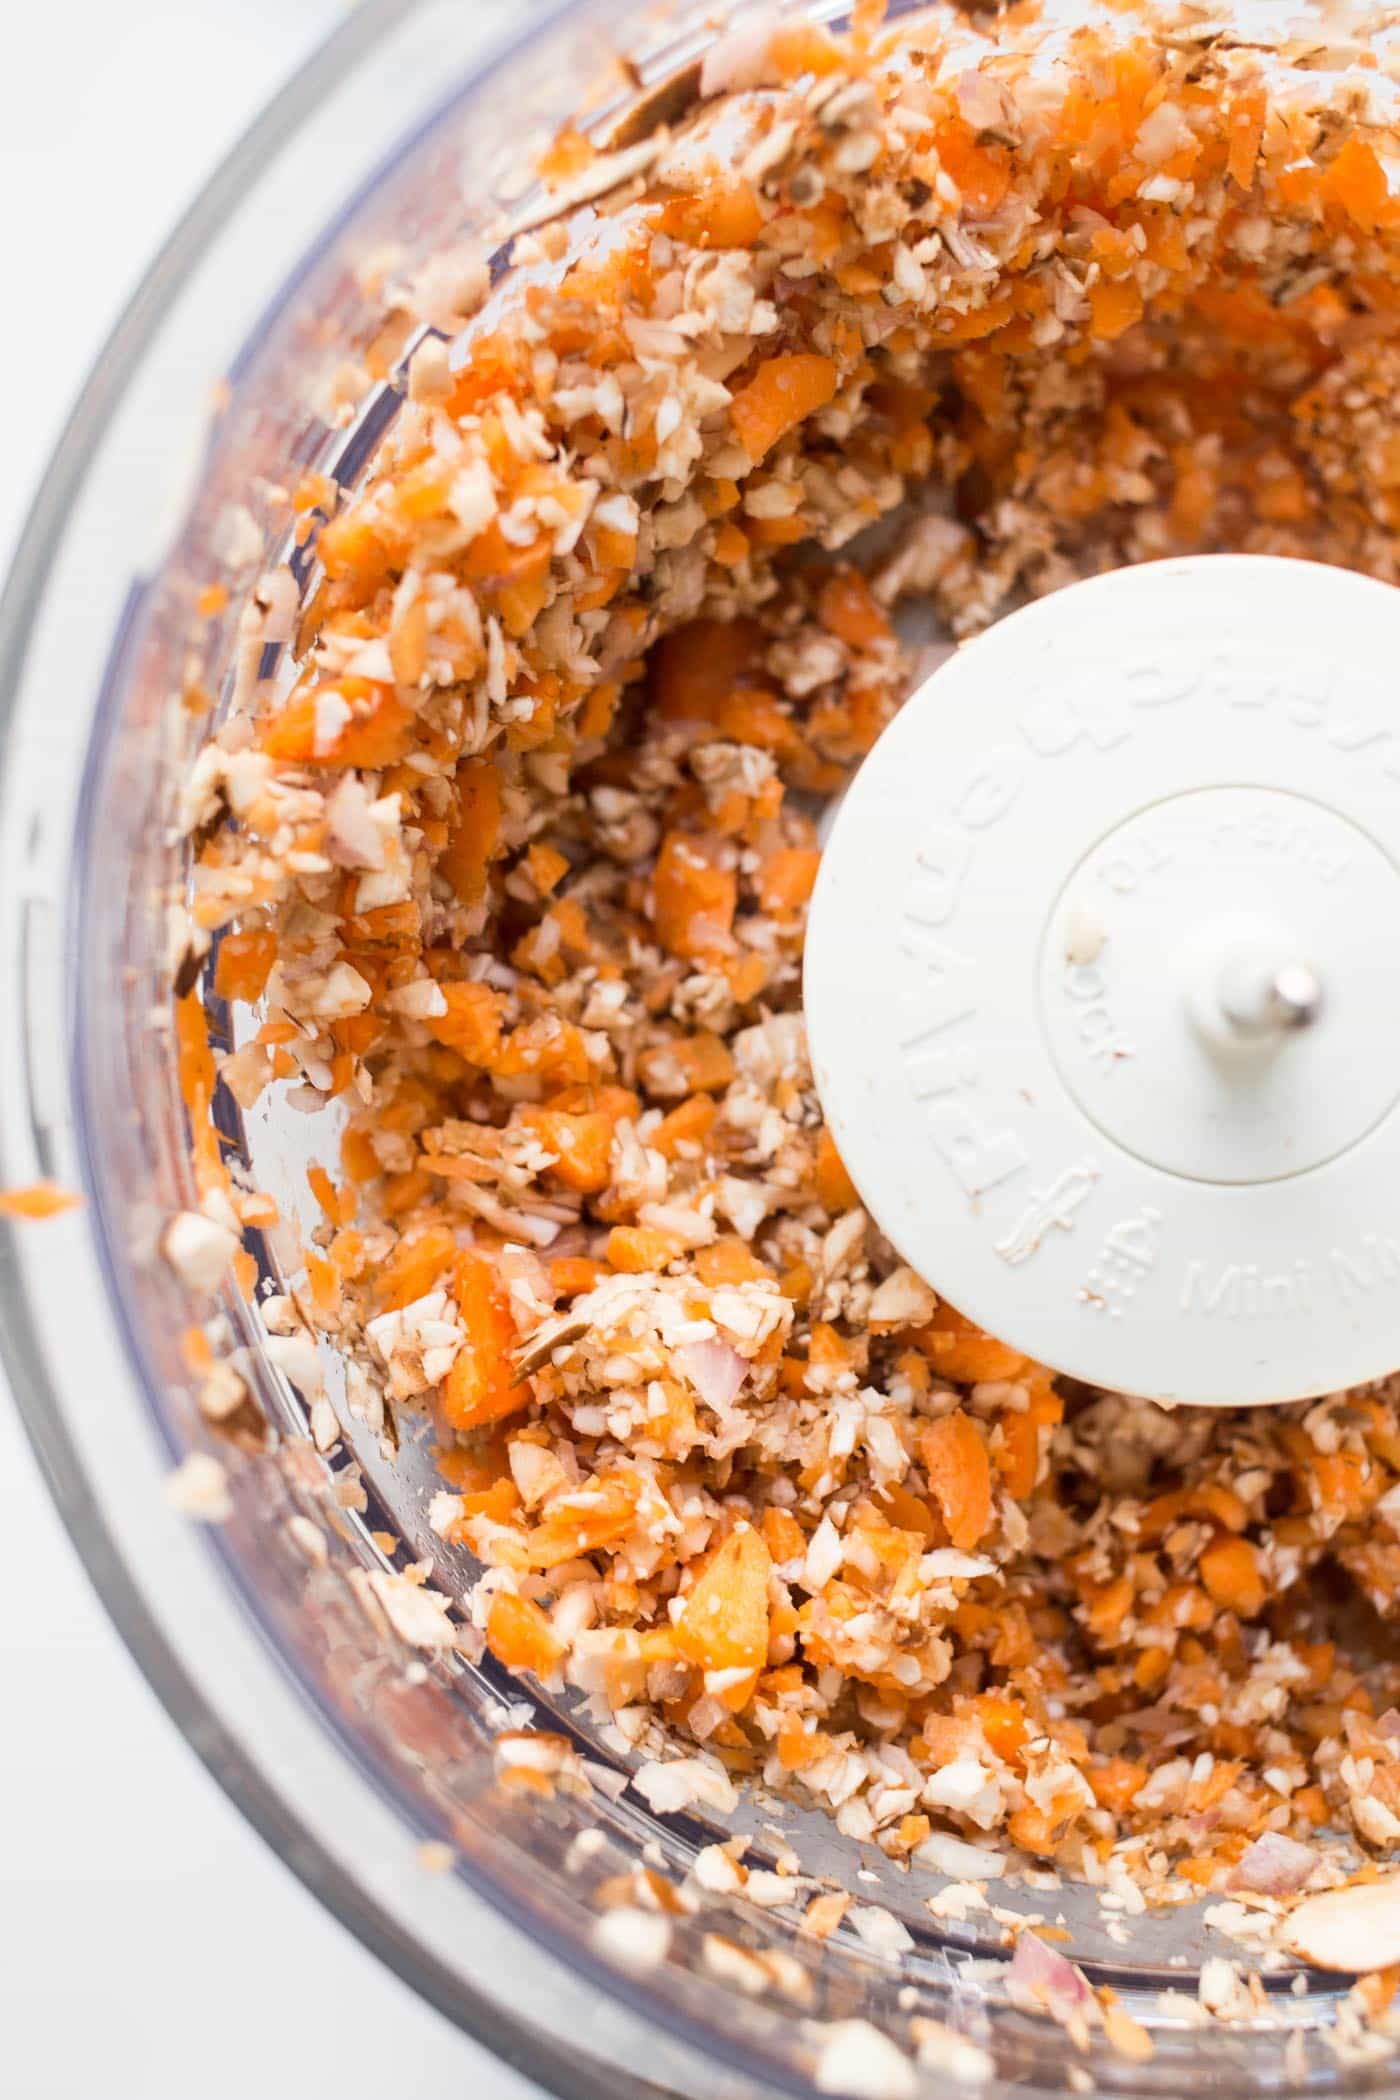 Close up of a food processor filled with diced mushrooms, carrots, and shallots.